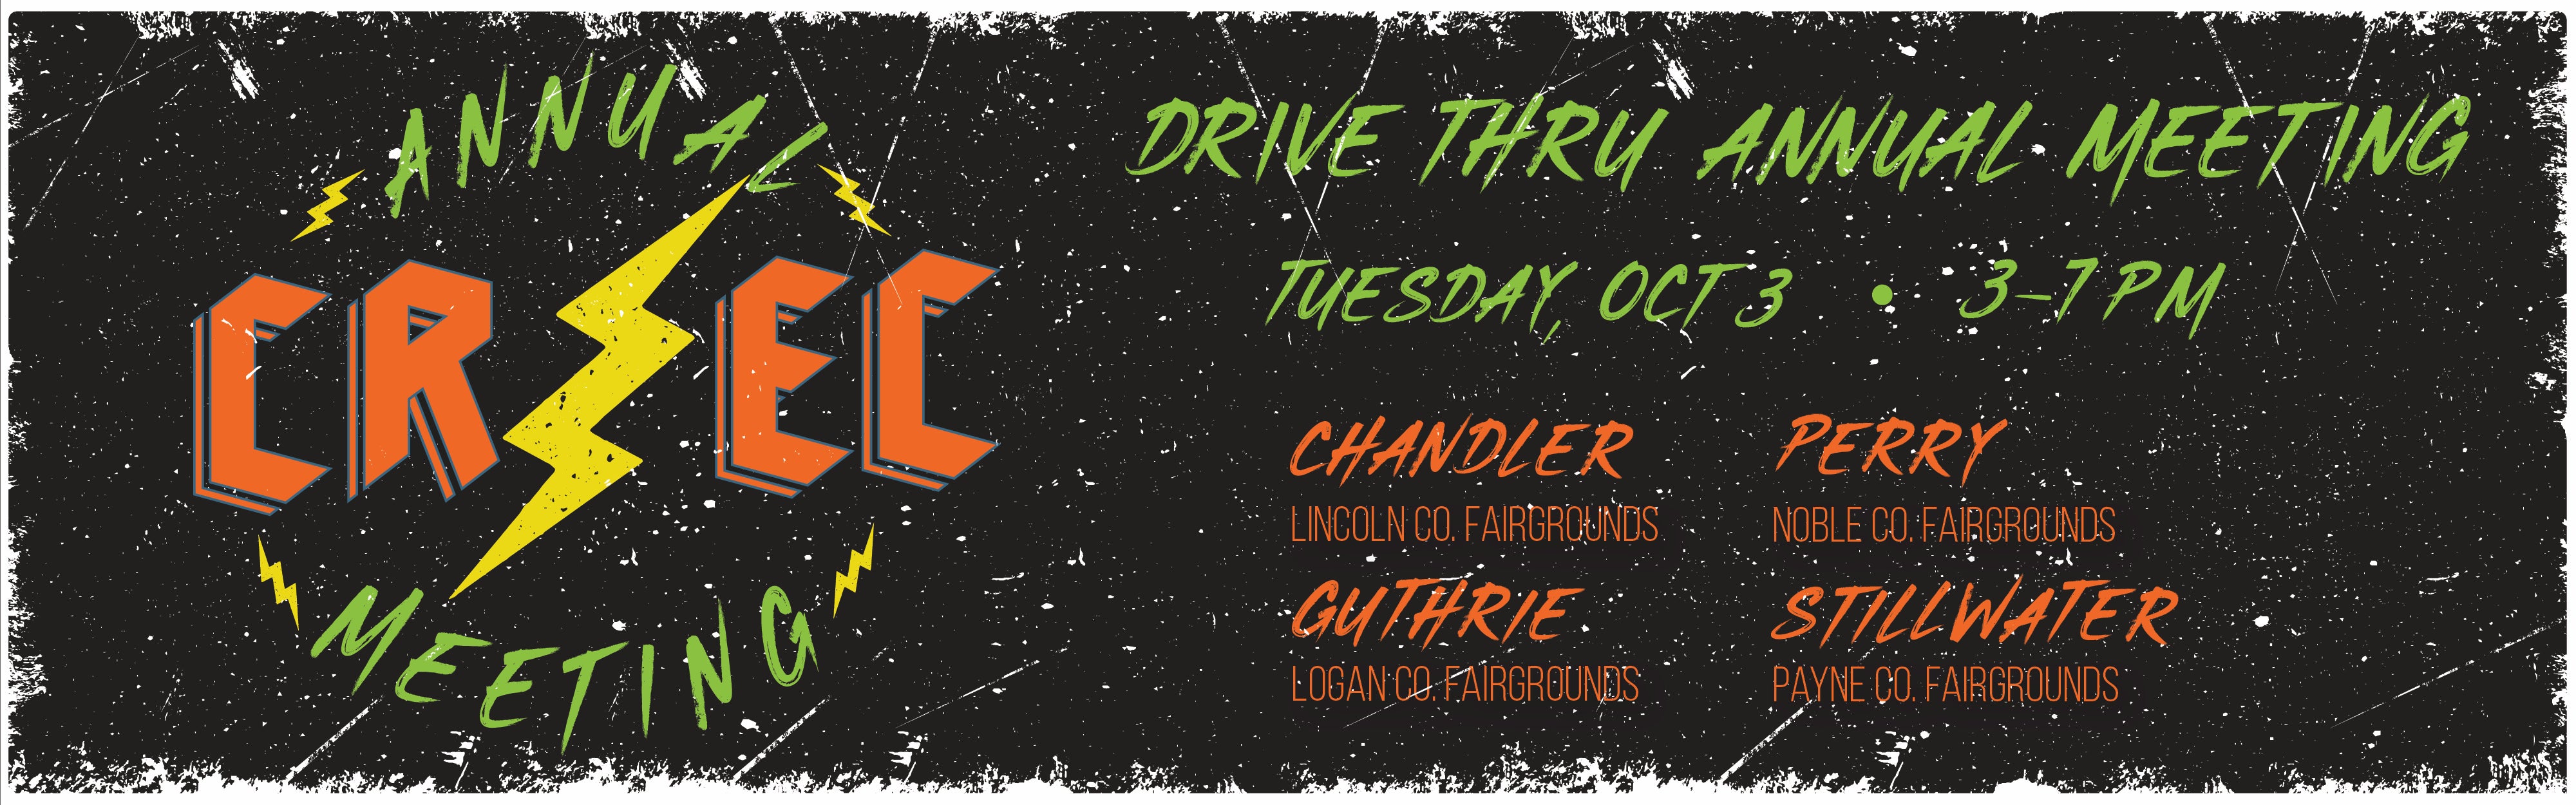 CREC Annual Meeting Drive Thru Tuesday, Oct. 3 from 3 to 7 p.m. in Chandler, Perry, Guthrie and Stillwater.